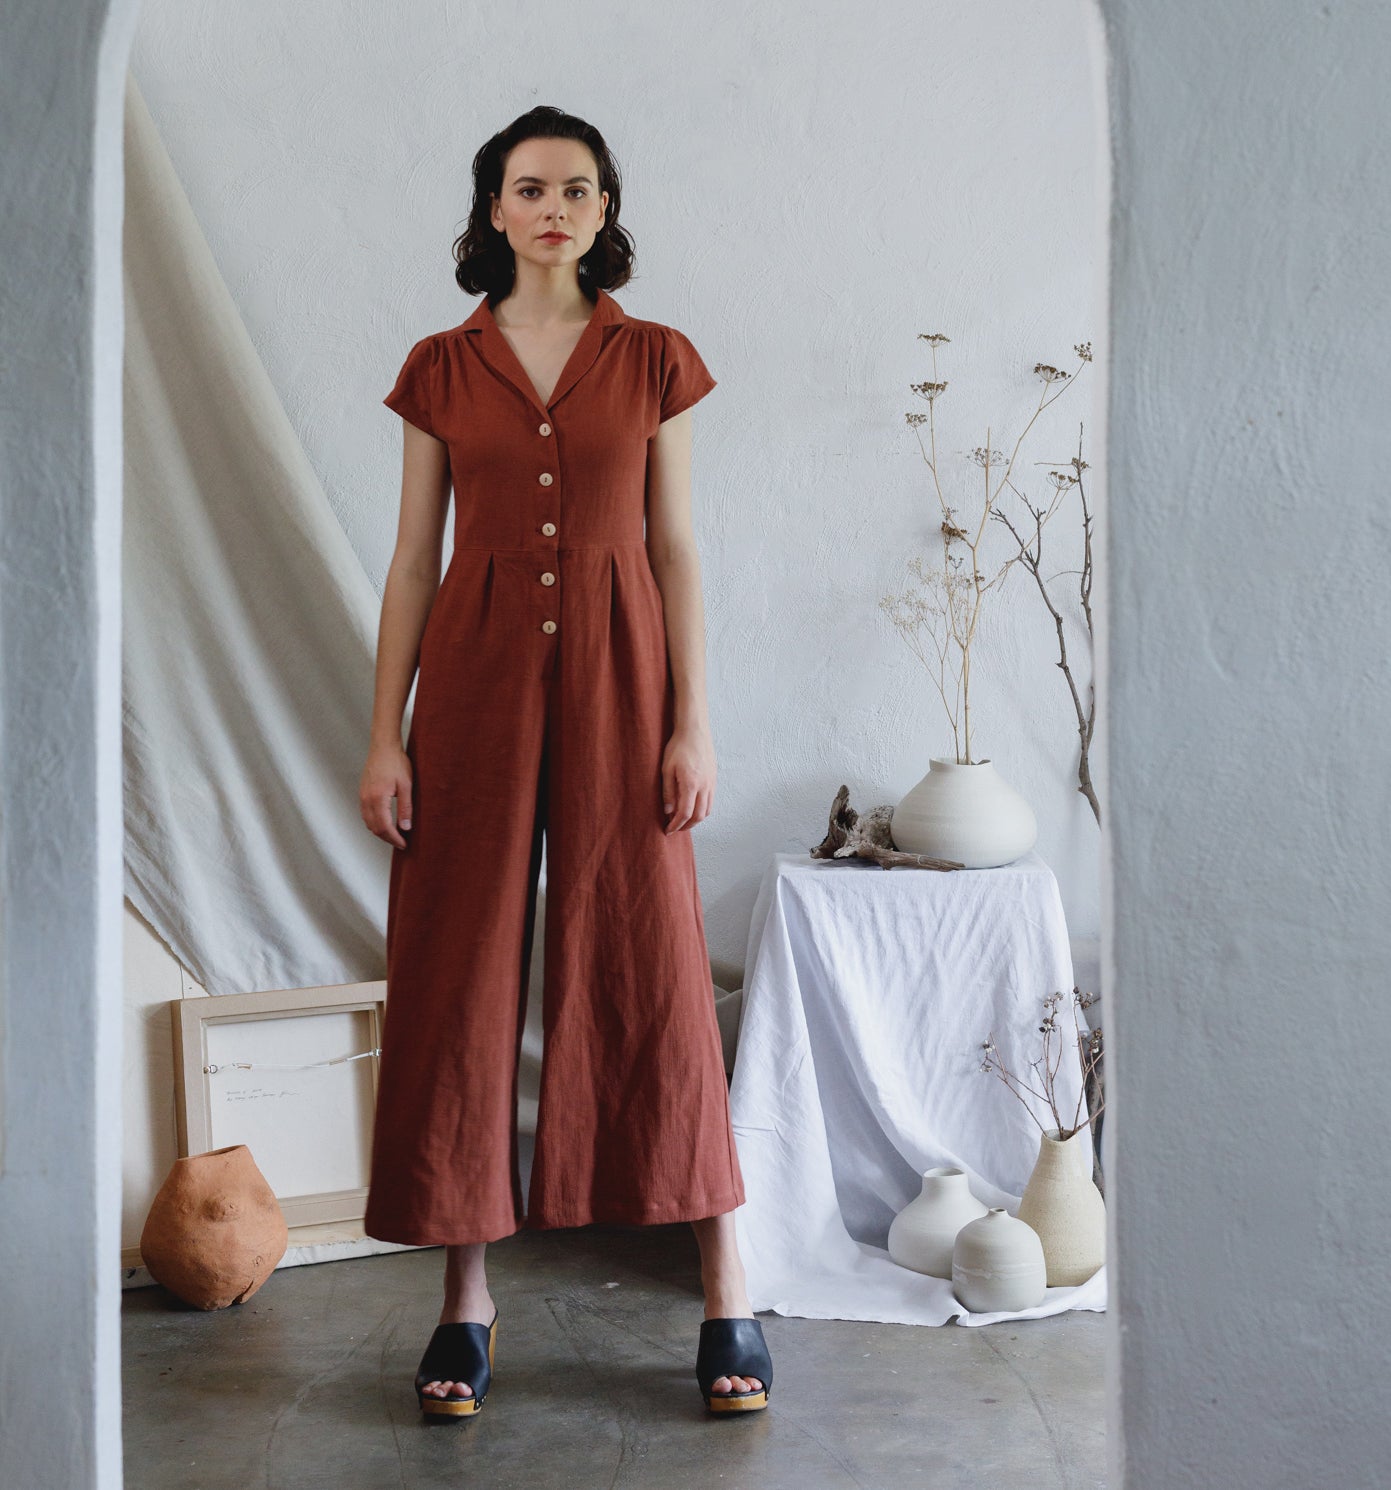 Women's Dresses and Jumpsuits made sustainably in Australia